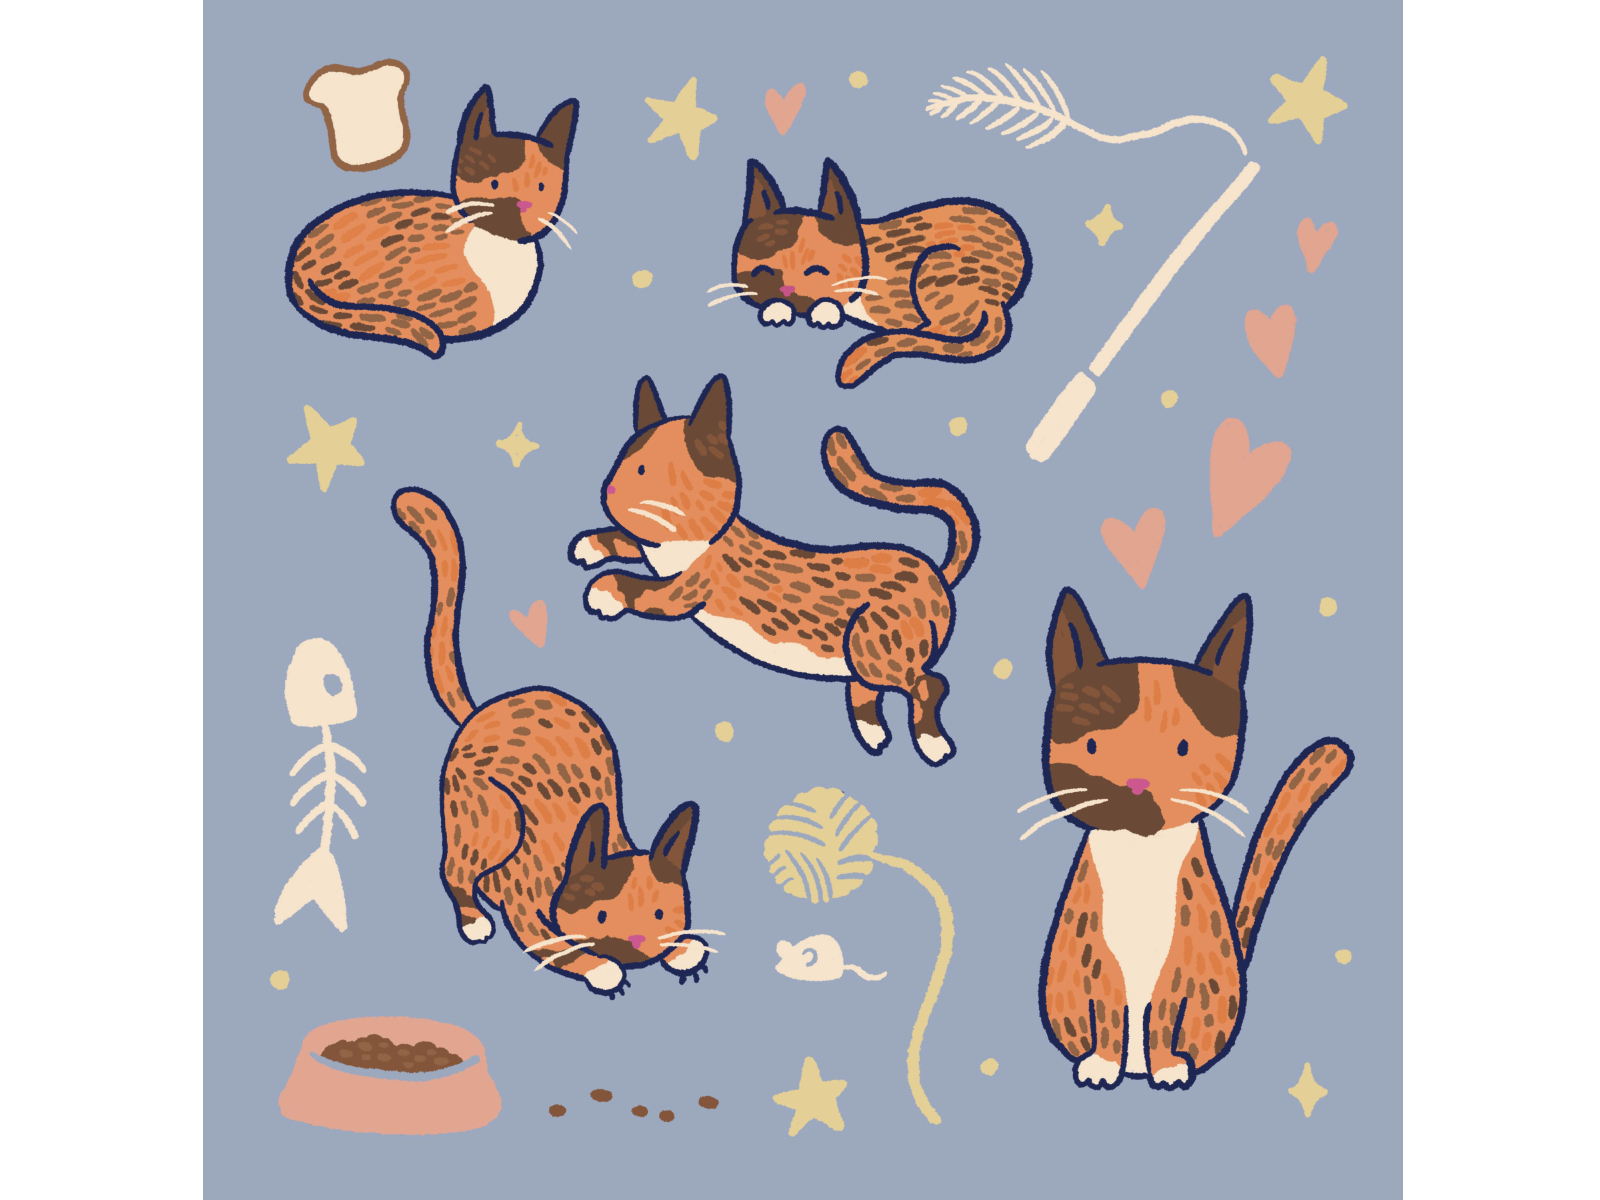 Cat doodles by Katie Nieland on Dribbble